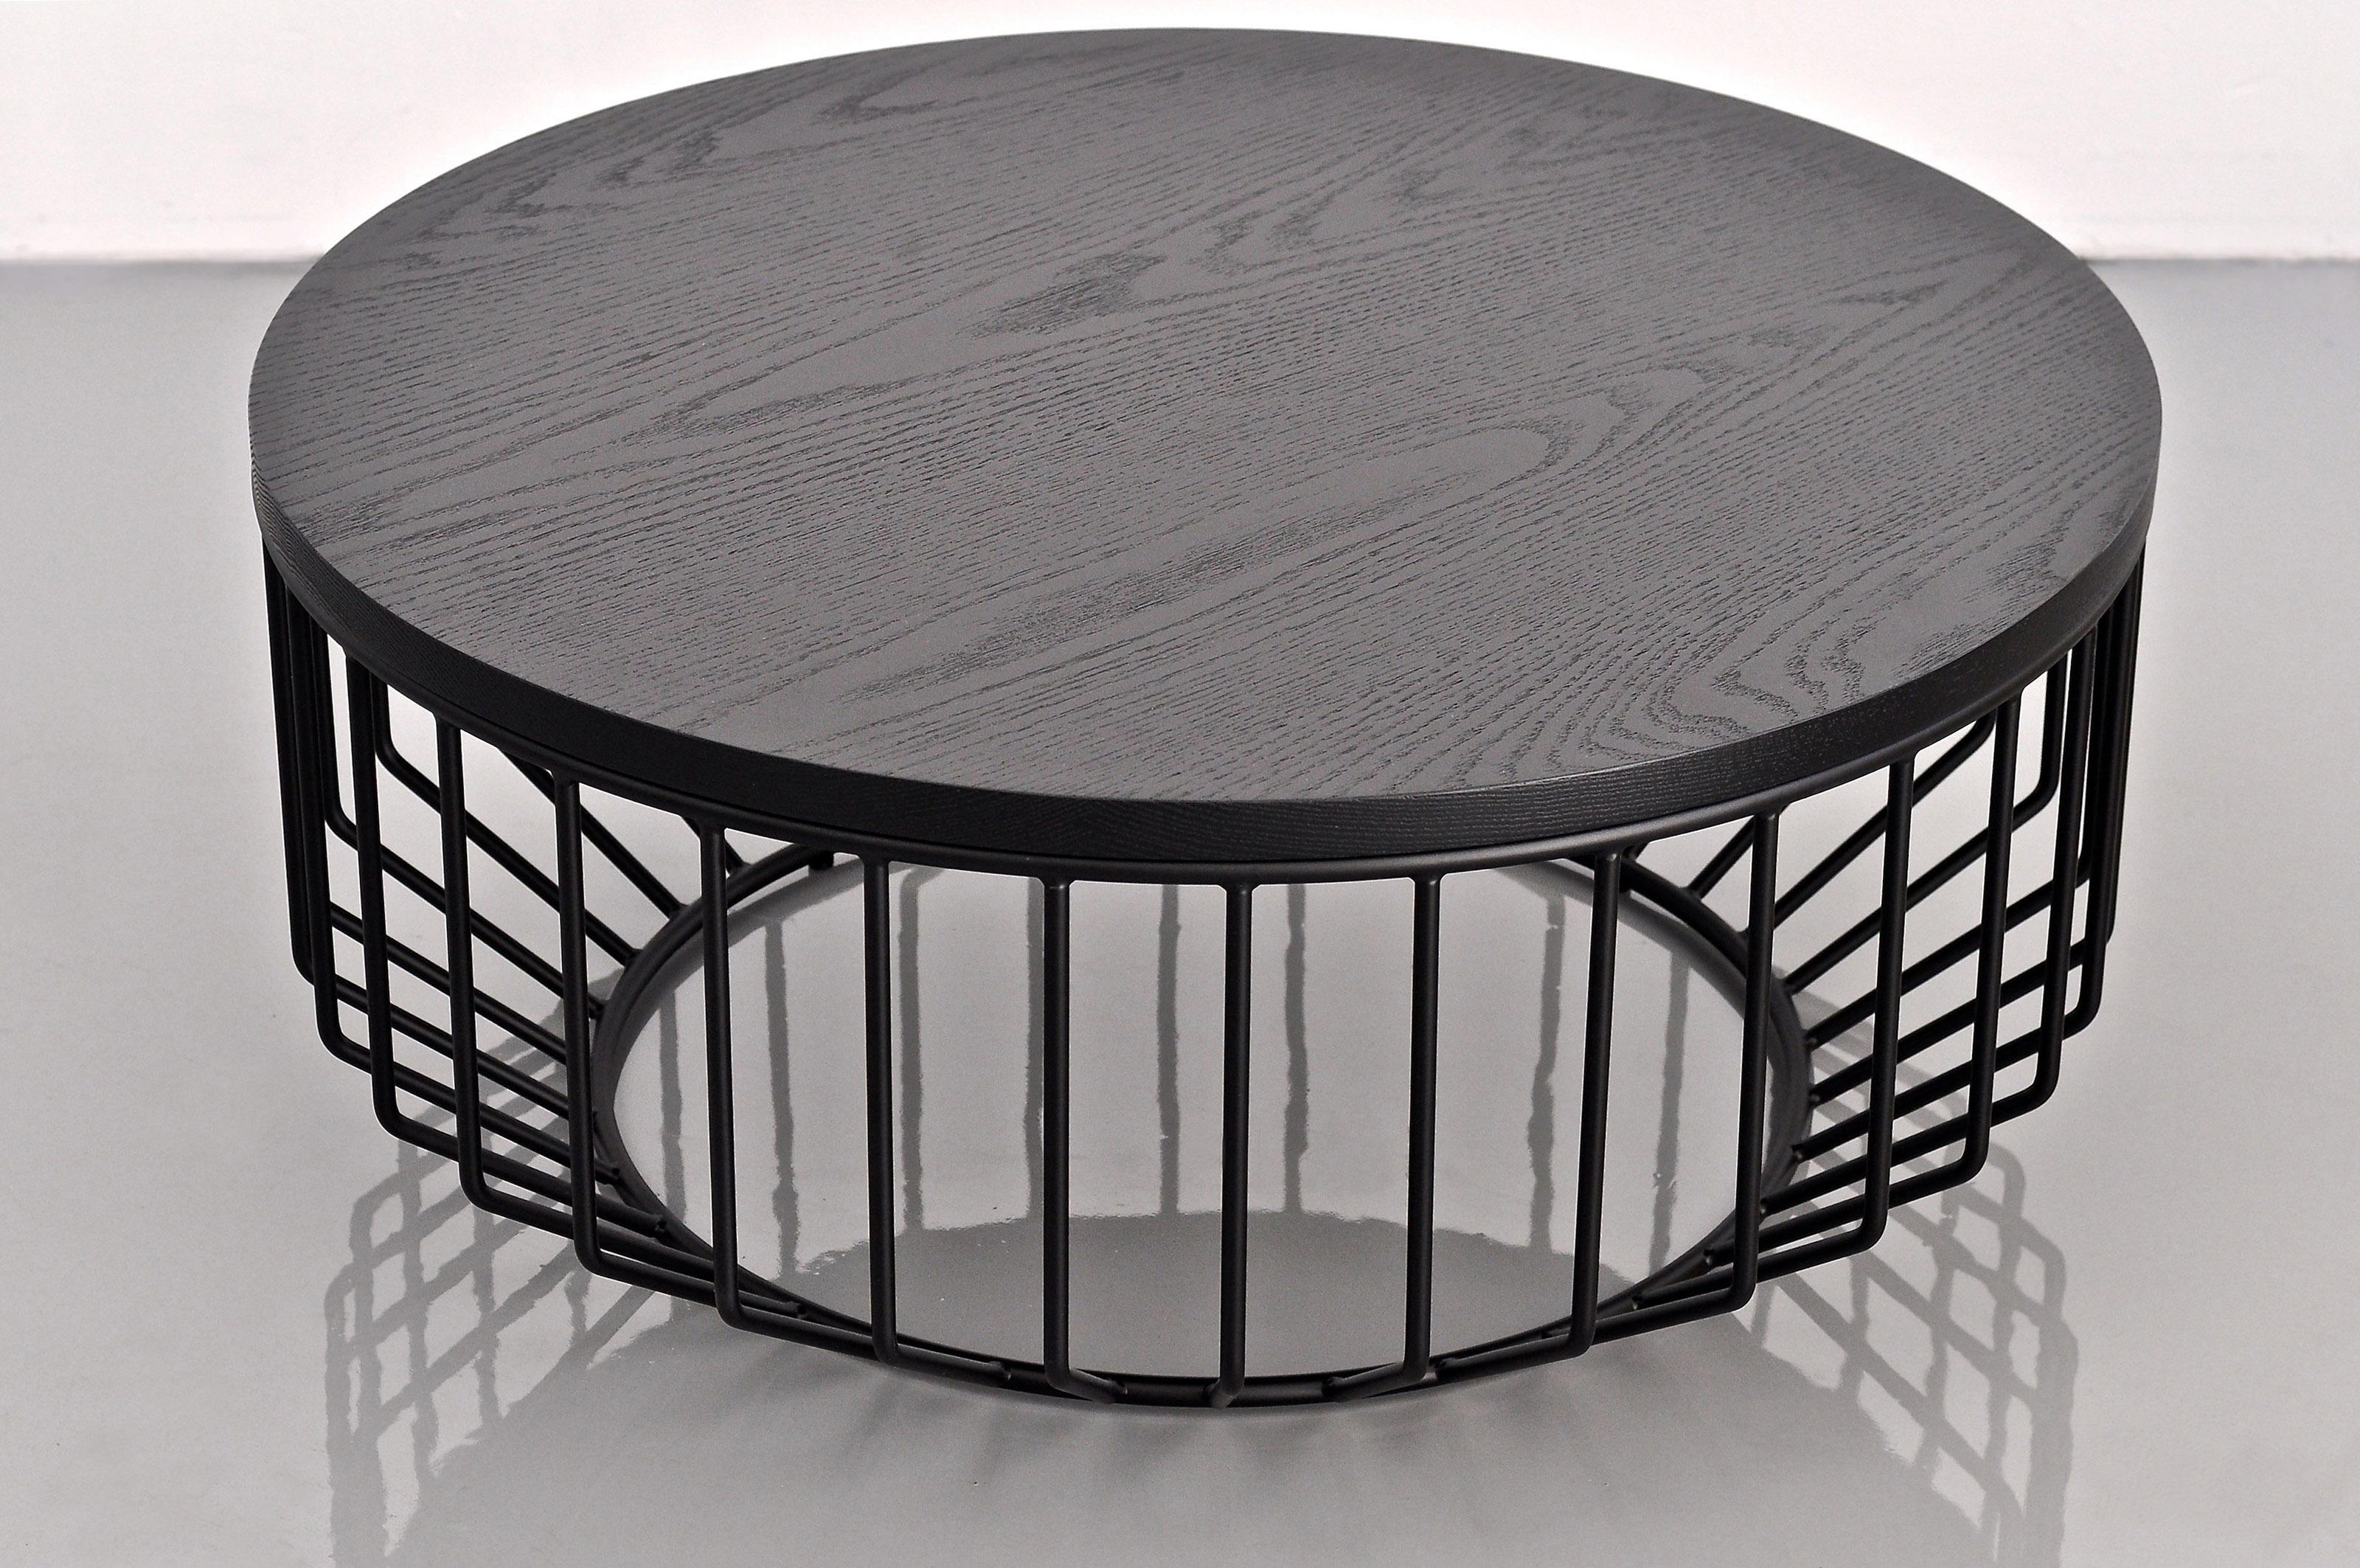 Wired Coffee Table by Phase Design
Dimensions: Ø 81.3 x H 35.6 cm. 
Materials: Powder-coated metal and ebonized oak.

Solid steel bar with glass, upholstered, or solid wooden tops, available in walnut, white oak, or ebonized oak. Steel available in